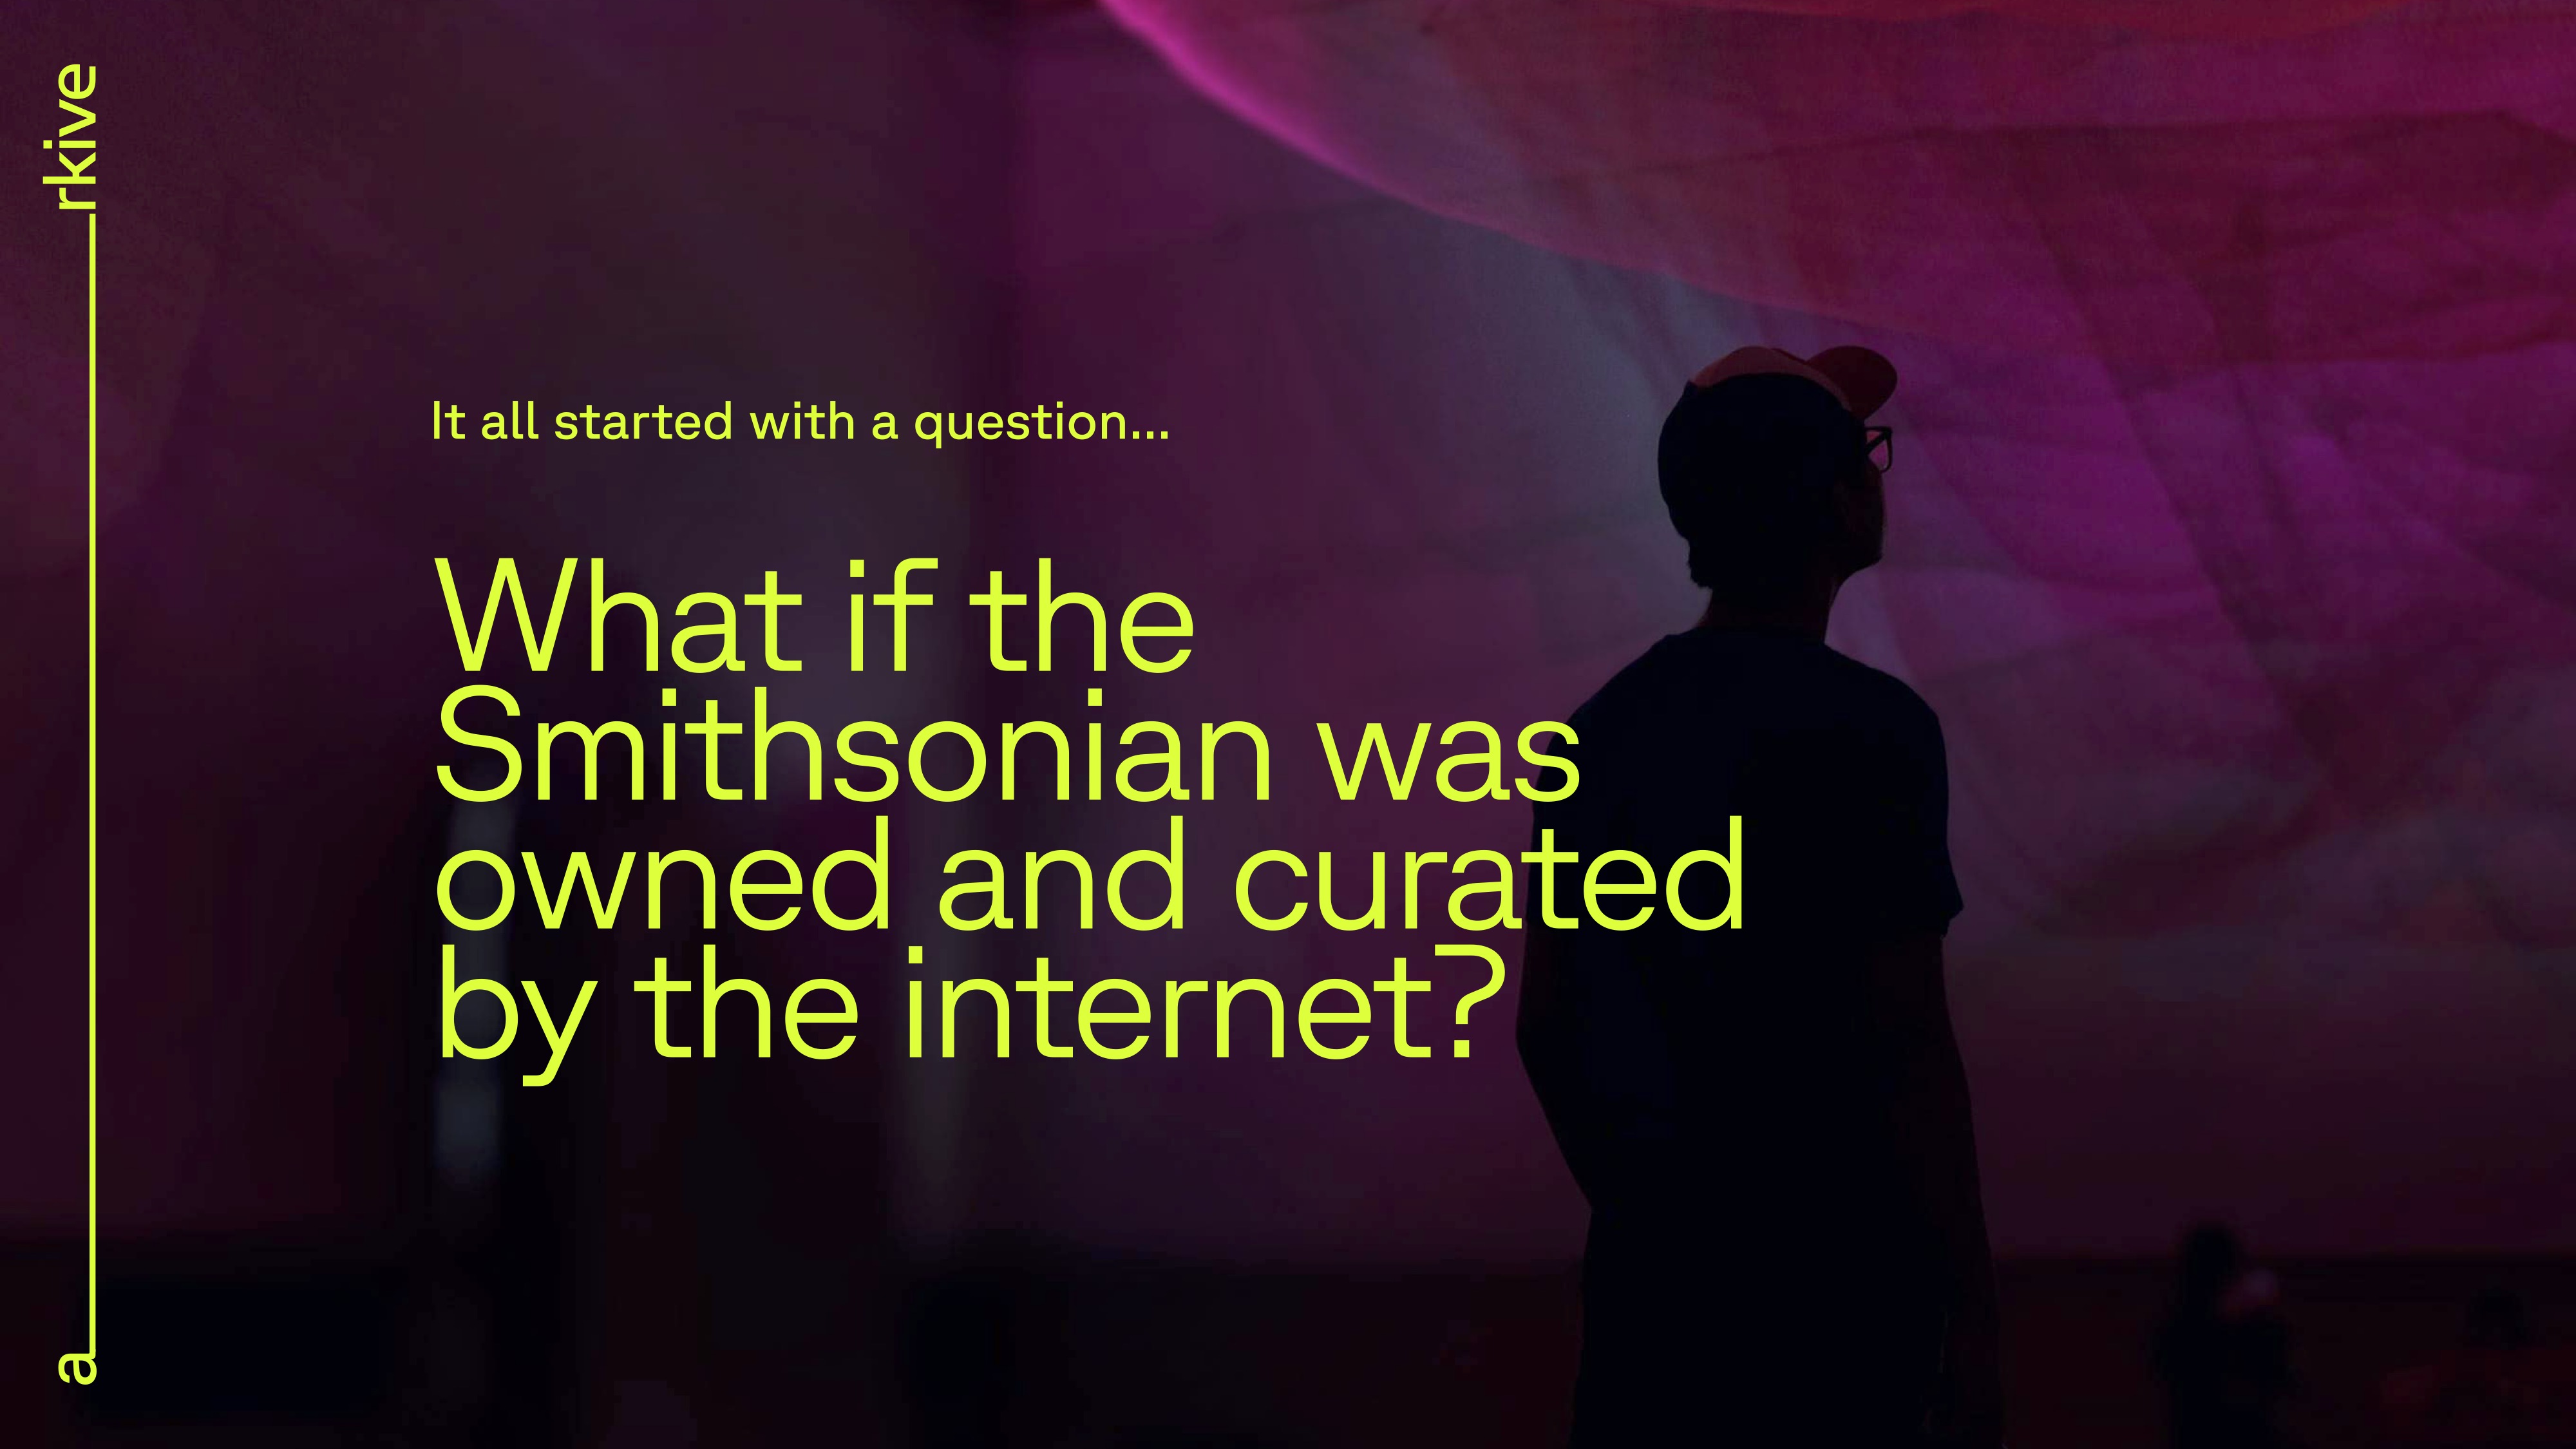 Arkive slide 2 - What if the Smithsonian was owned and coordinated by the Internet?